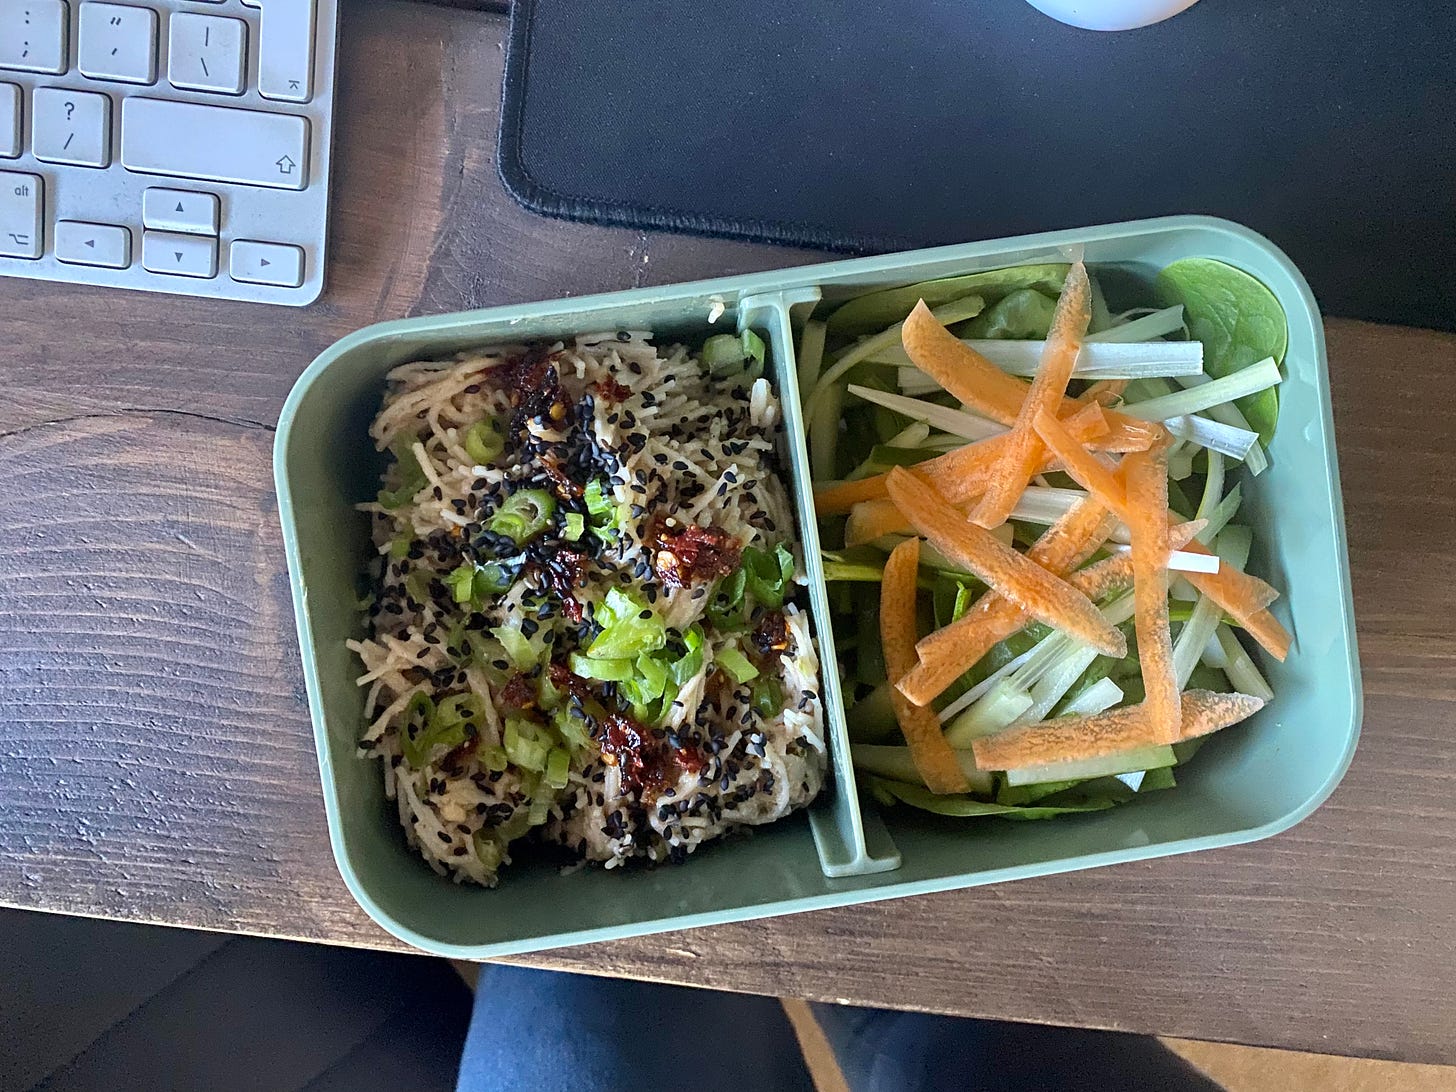 bento box filled with noodles and a salad of cucumber, carrots and spring onions. The green box is placed on a wooden desk, next to a mouse mat and keyboard